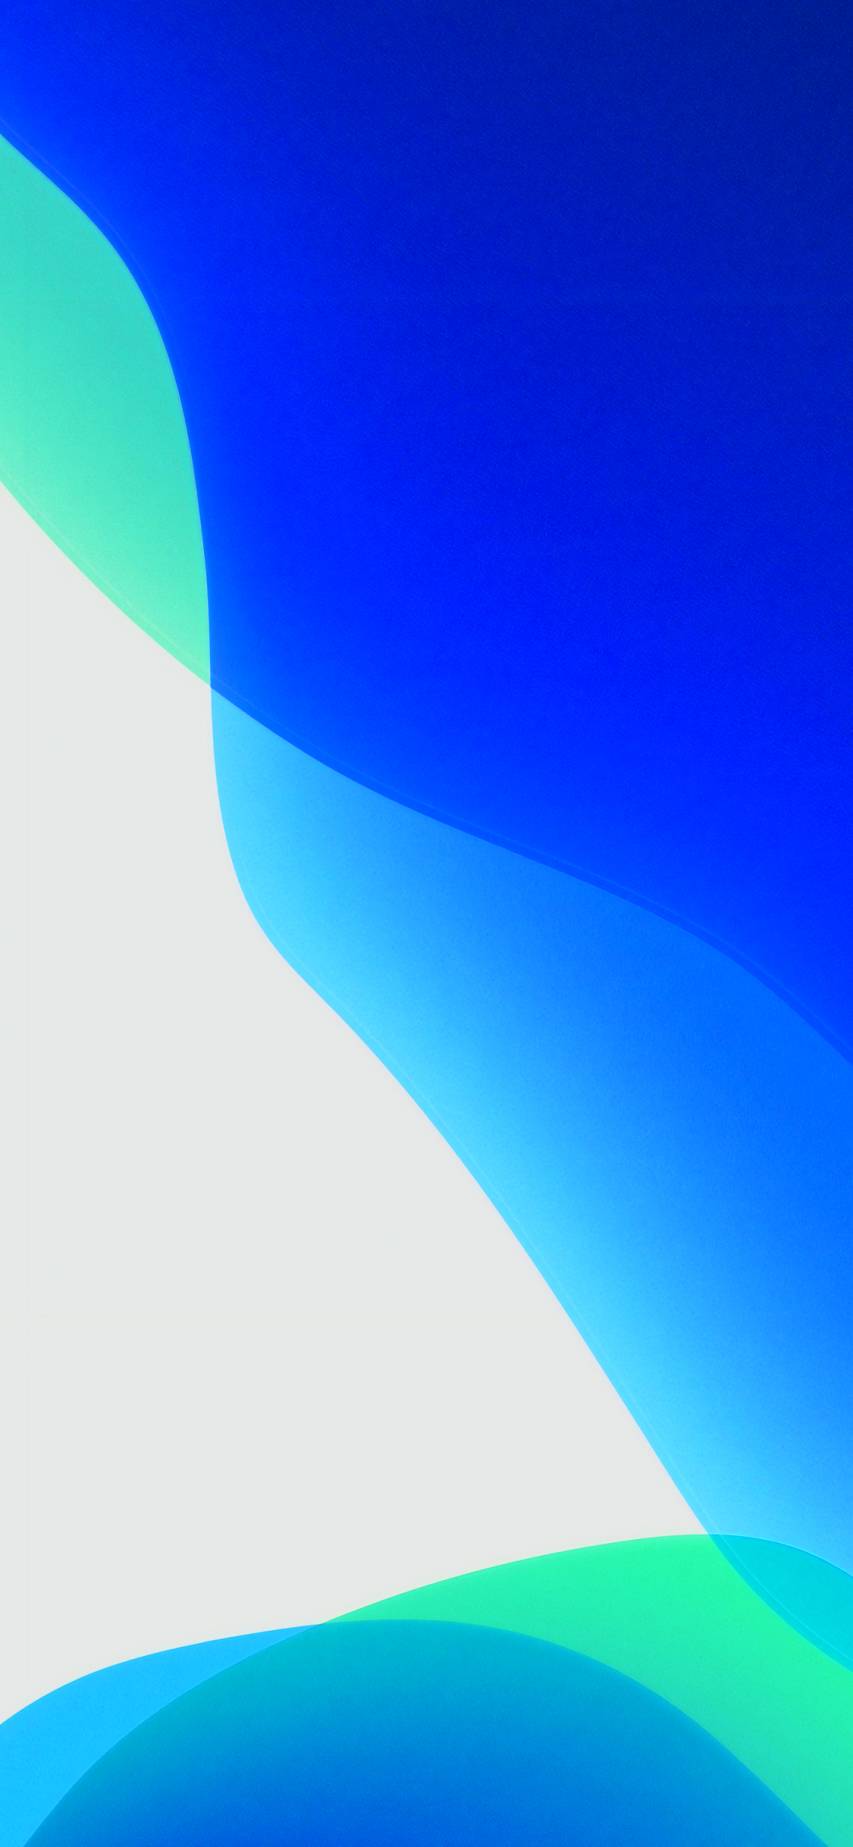 Change the wallpaper on your iPhone  Apple Support